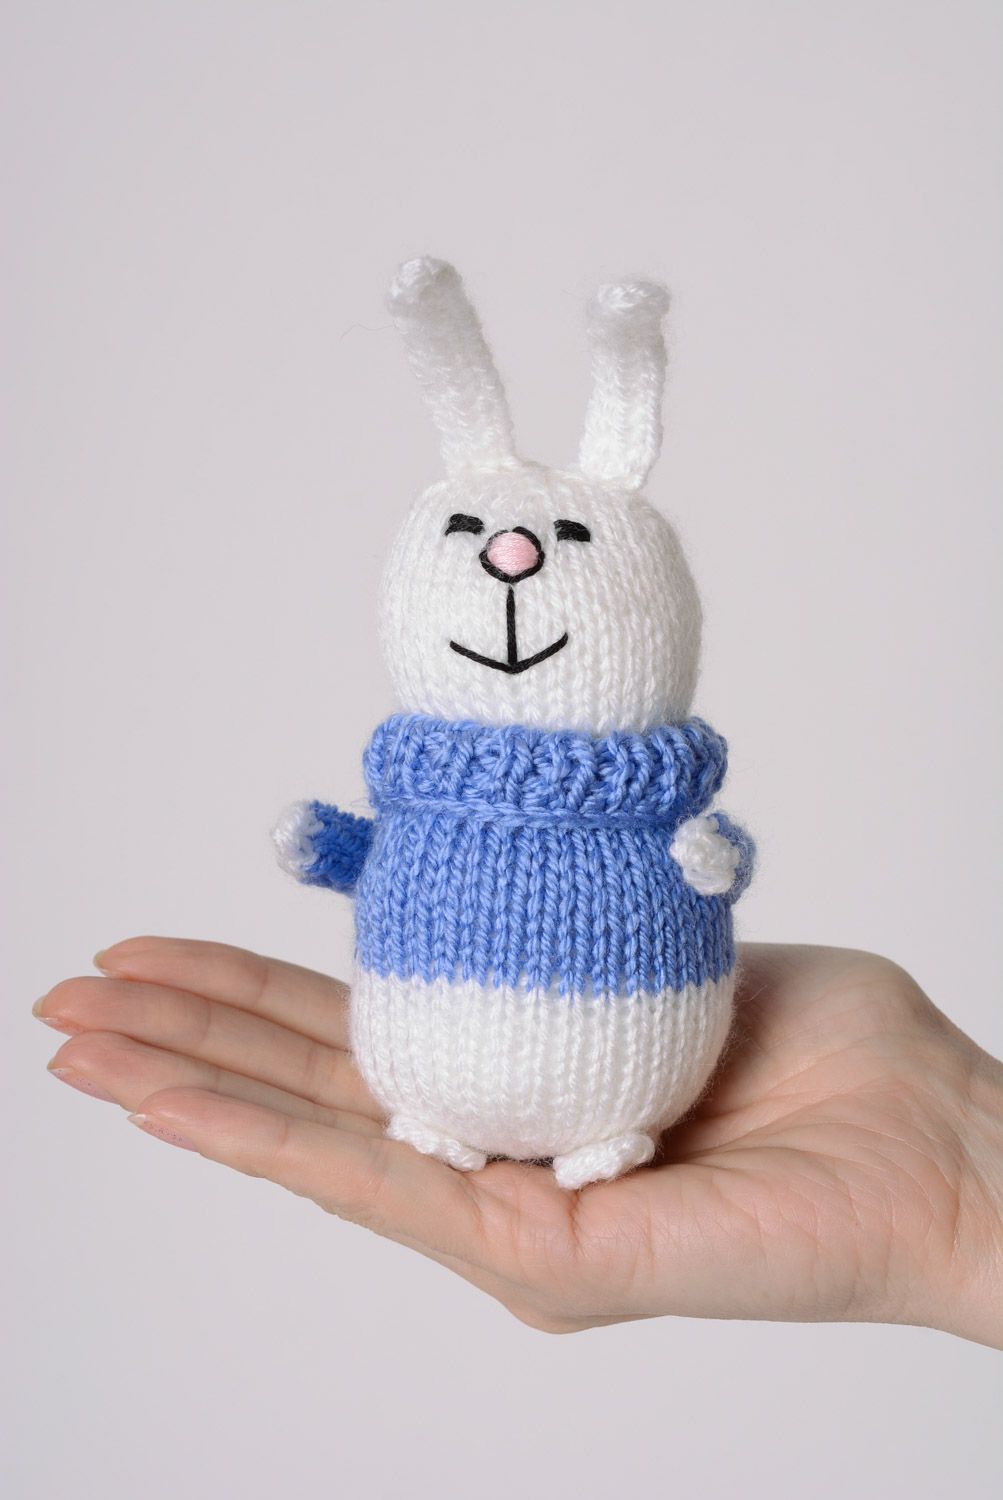 Handmade knitted soft toy smiling white bunny in blue sweater photo 3